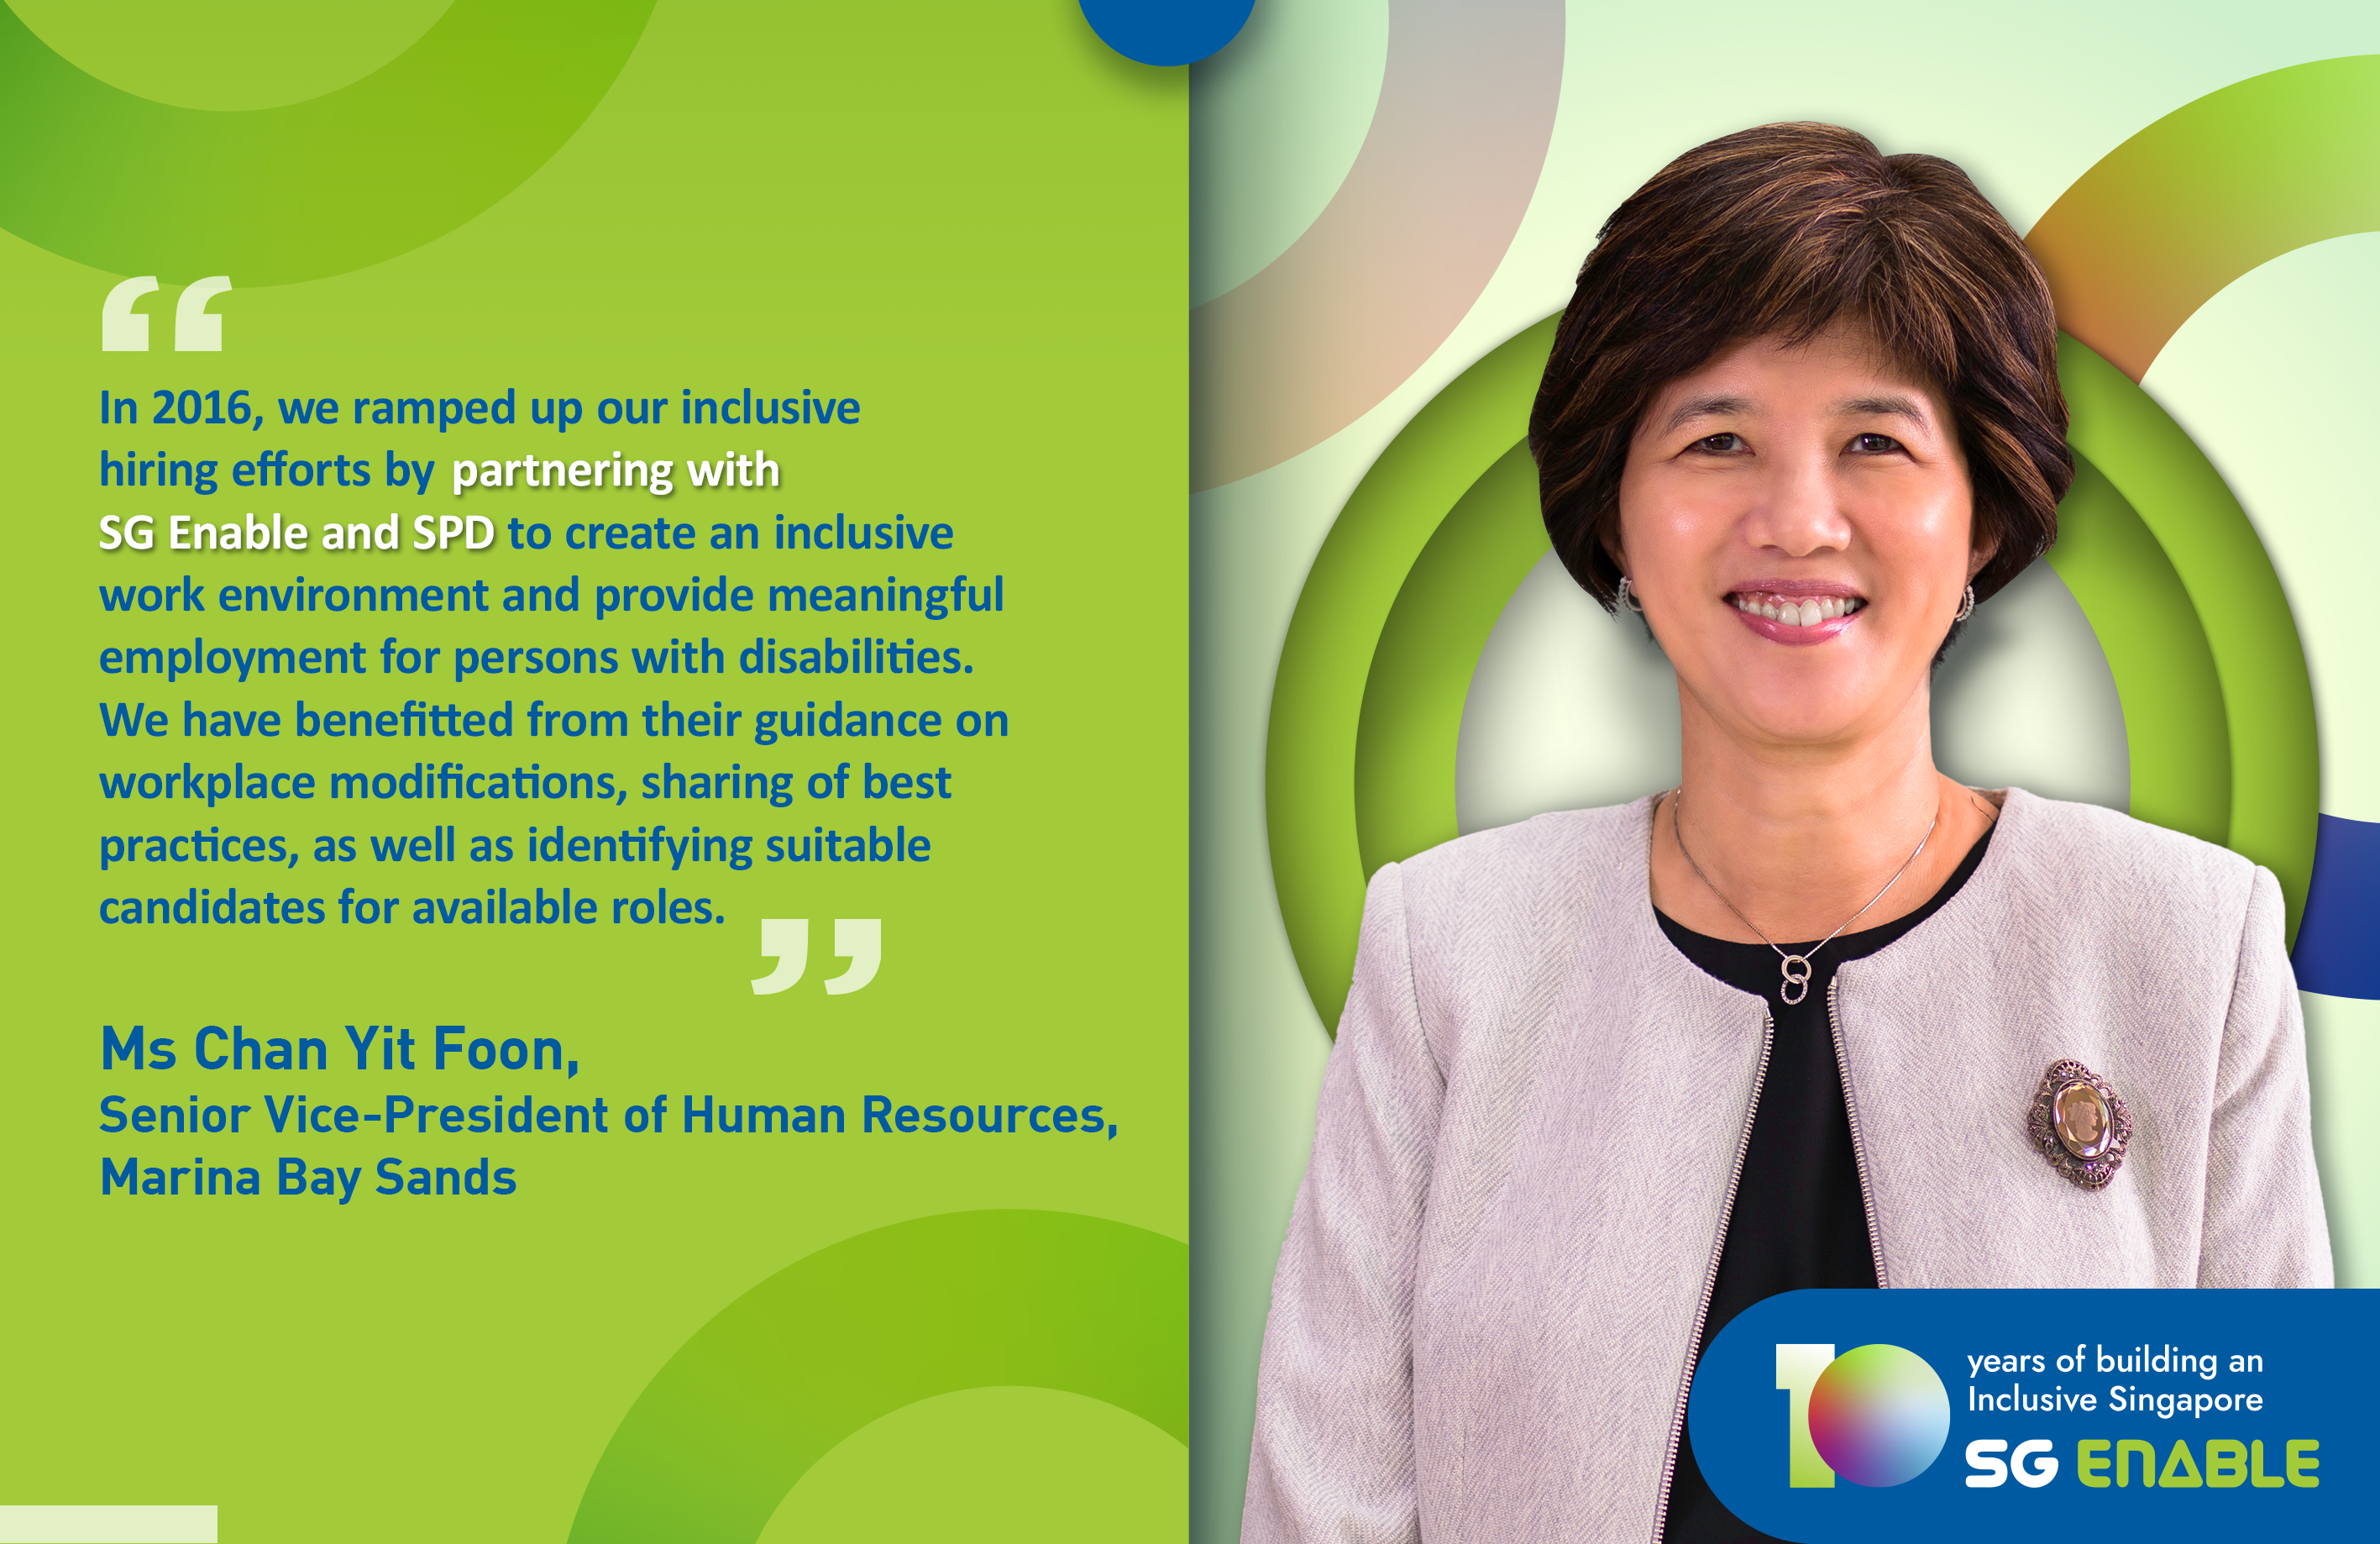 Image of Ms Chan Yit Foon, Senior Vice-President of HR, MBS with a quote about partnership with SG Enable and SPD.